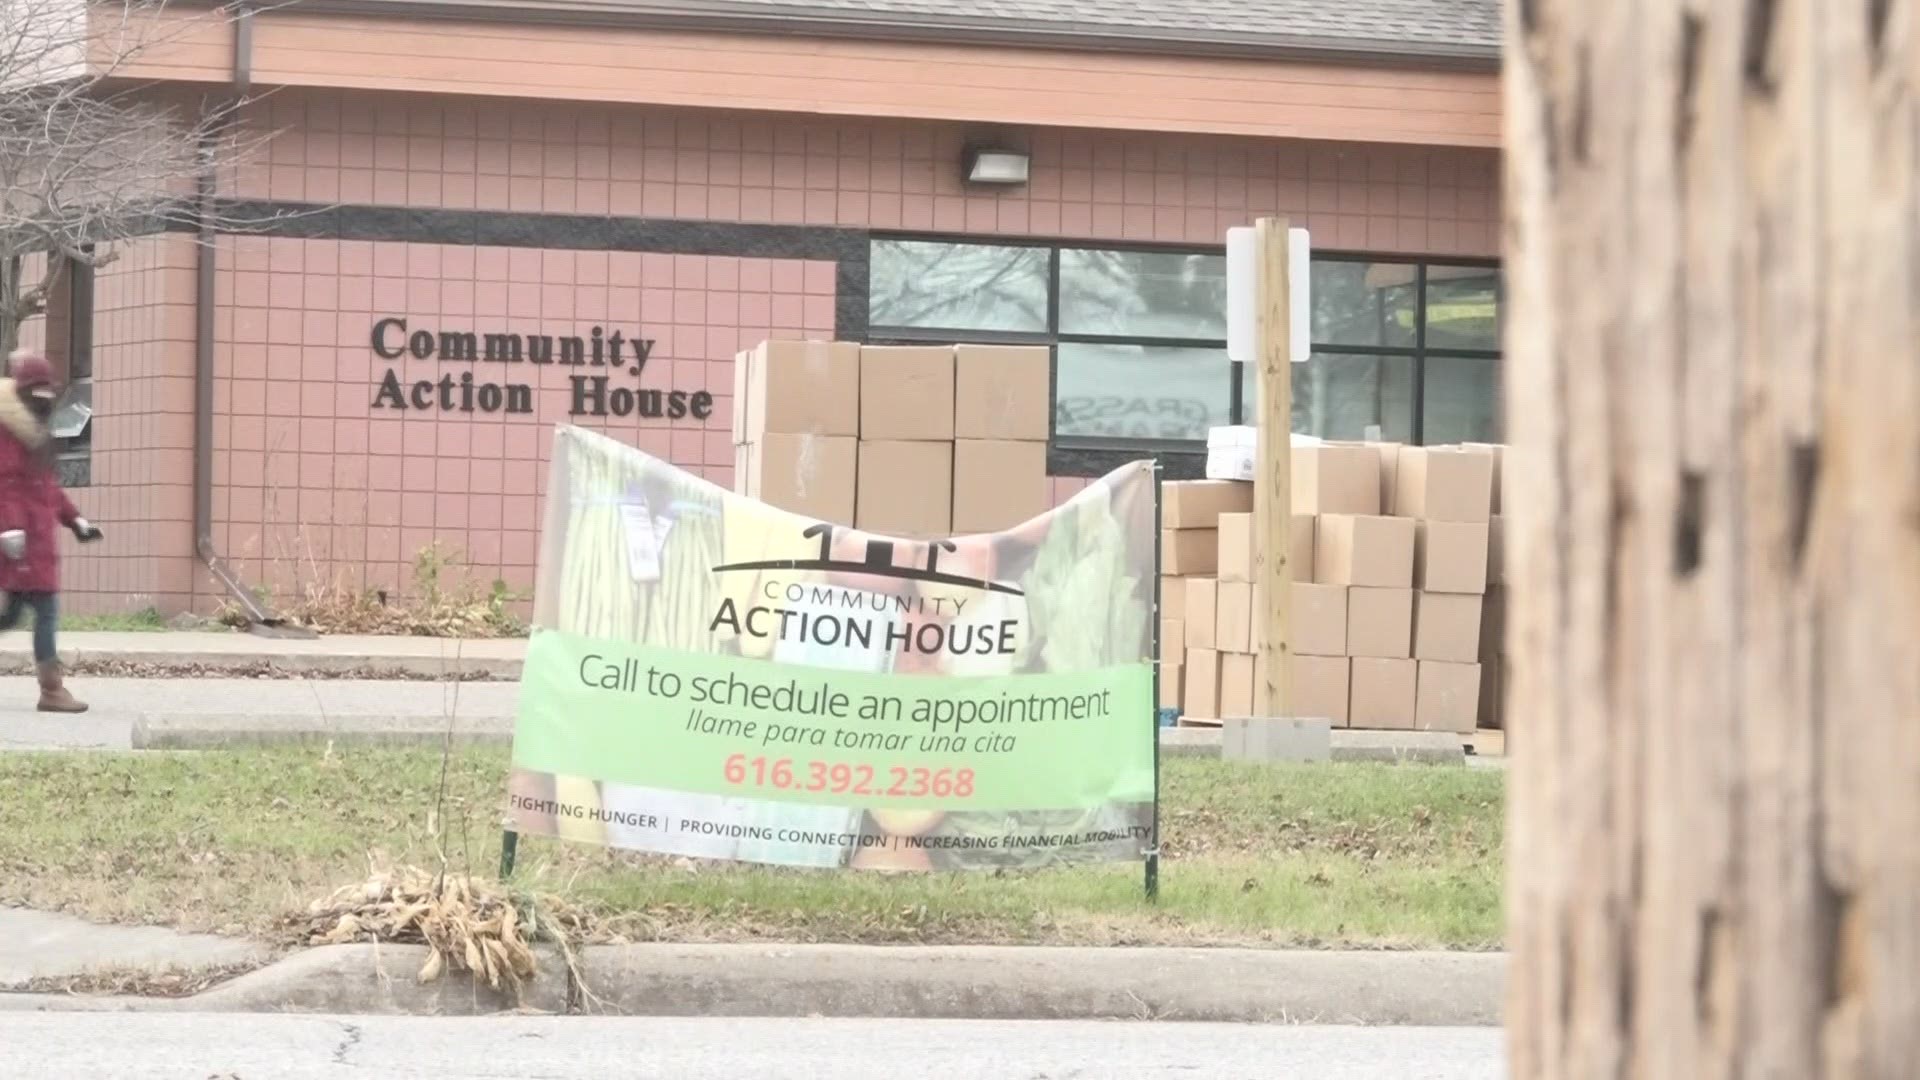 Holland outreach groups, Community Action House and Holland Rescue Mission, have partnered to bring food and home essentials to families in need.